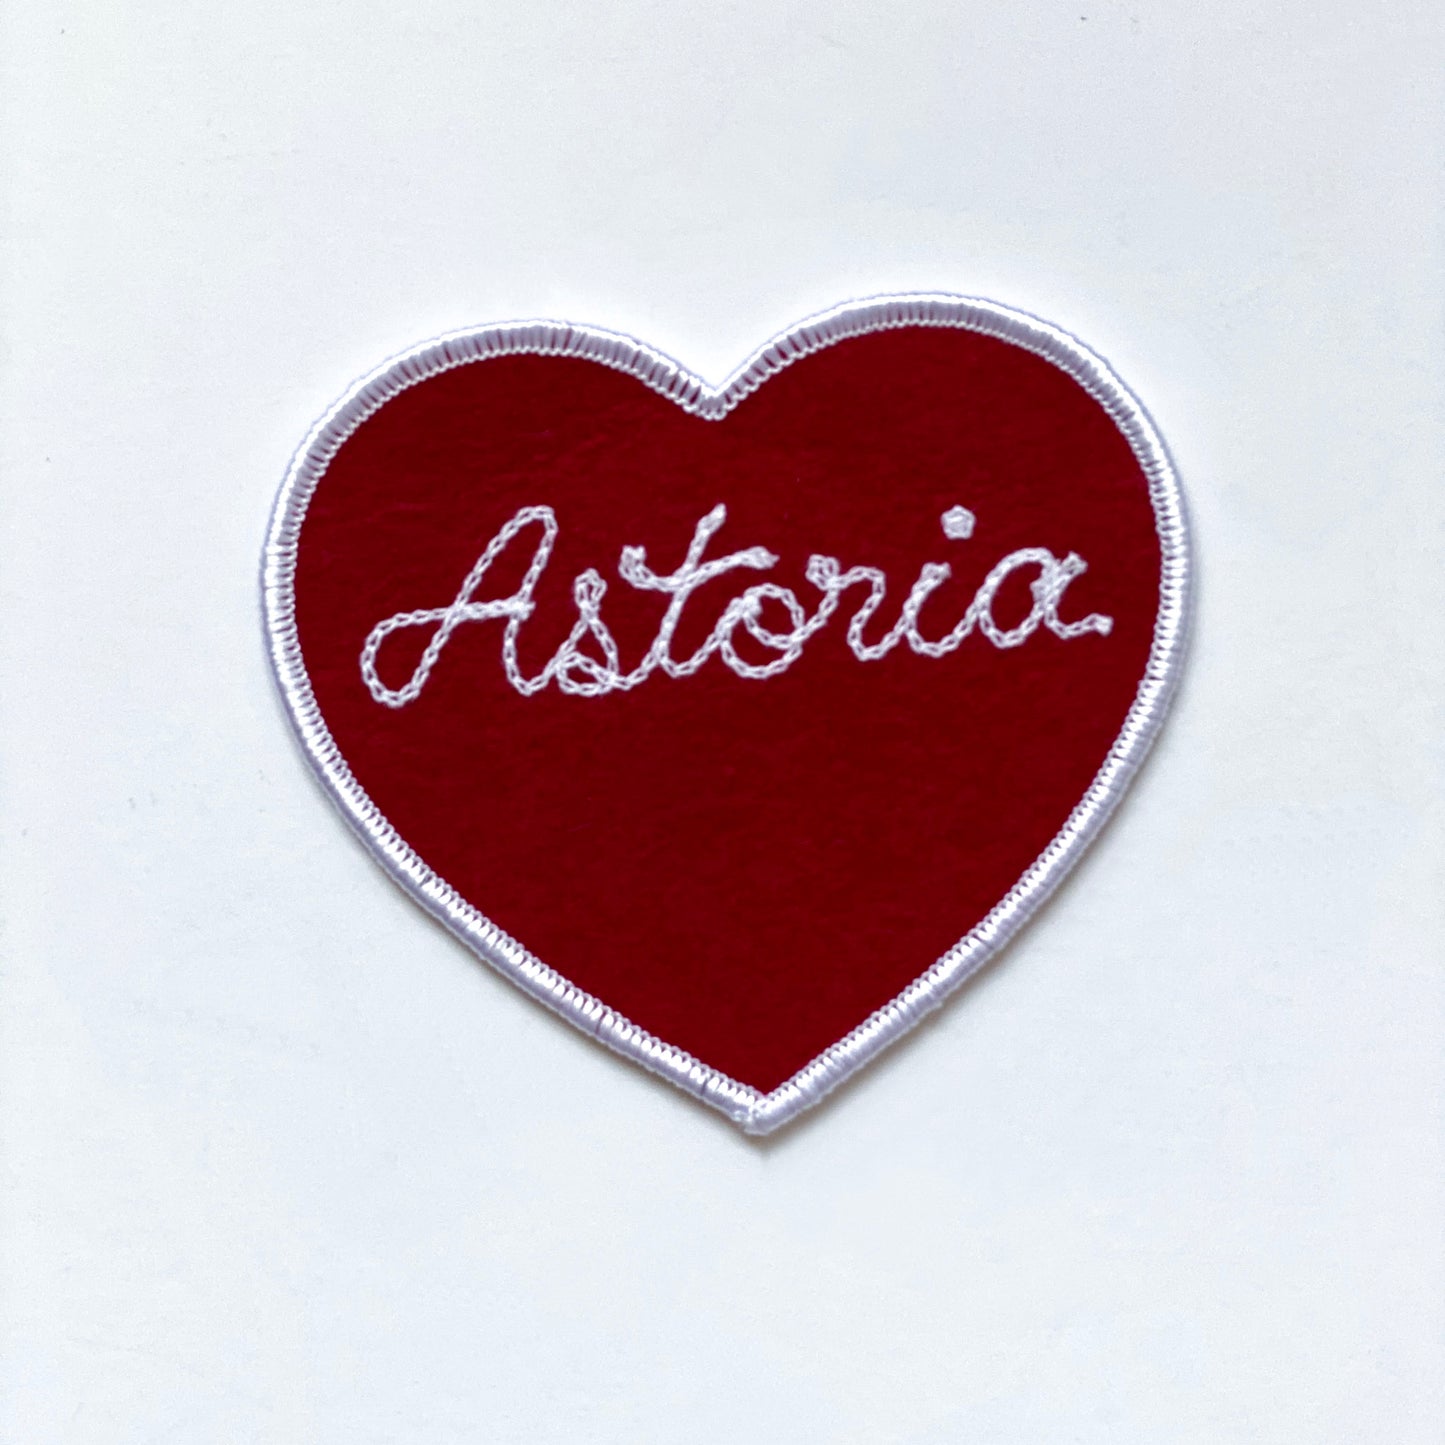 Handmade, custom "Astoria" heart patch in red felt with white embroidery.